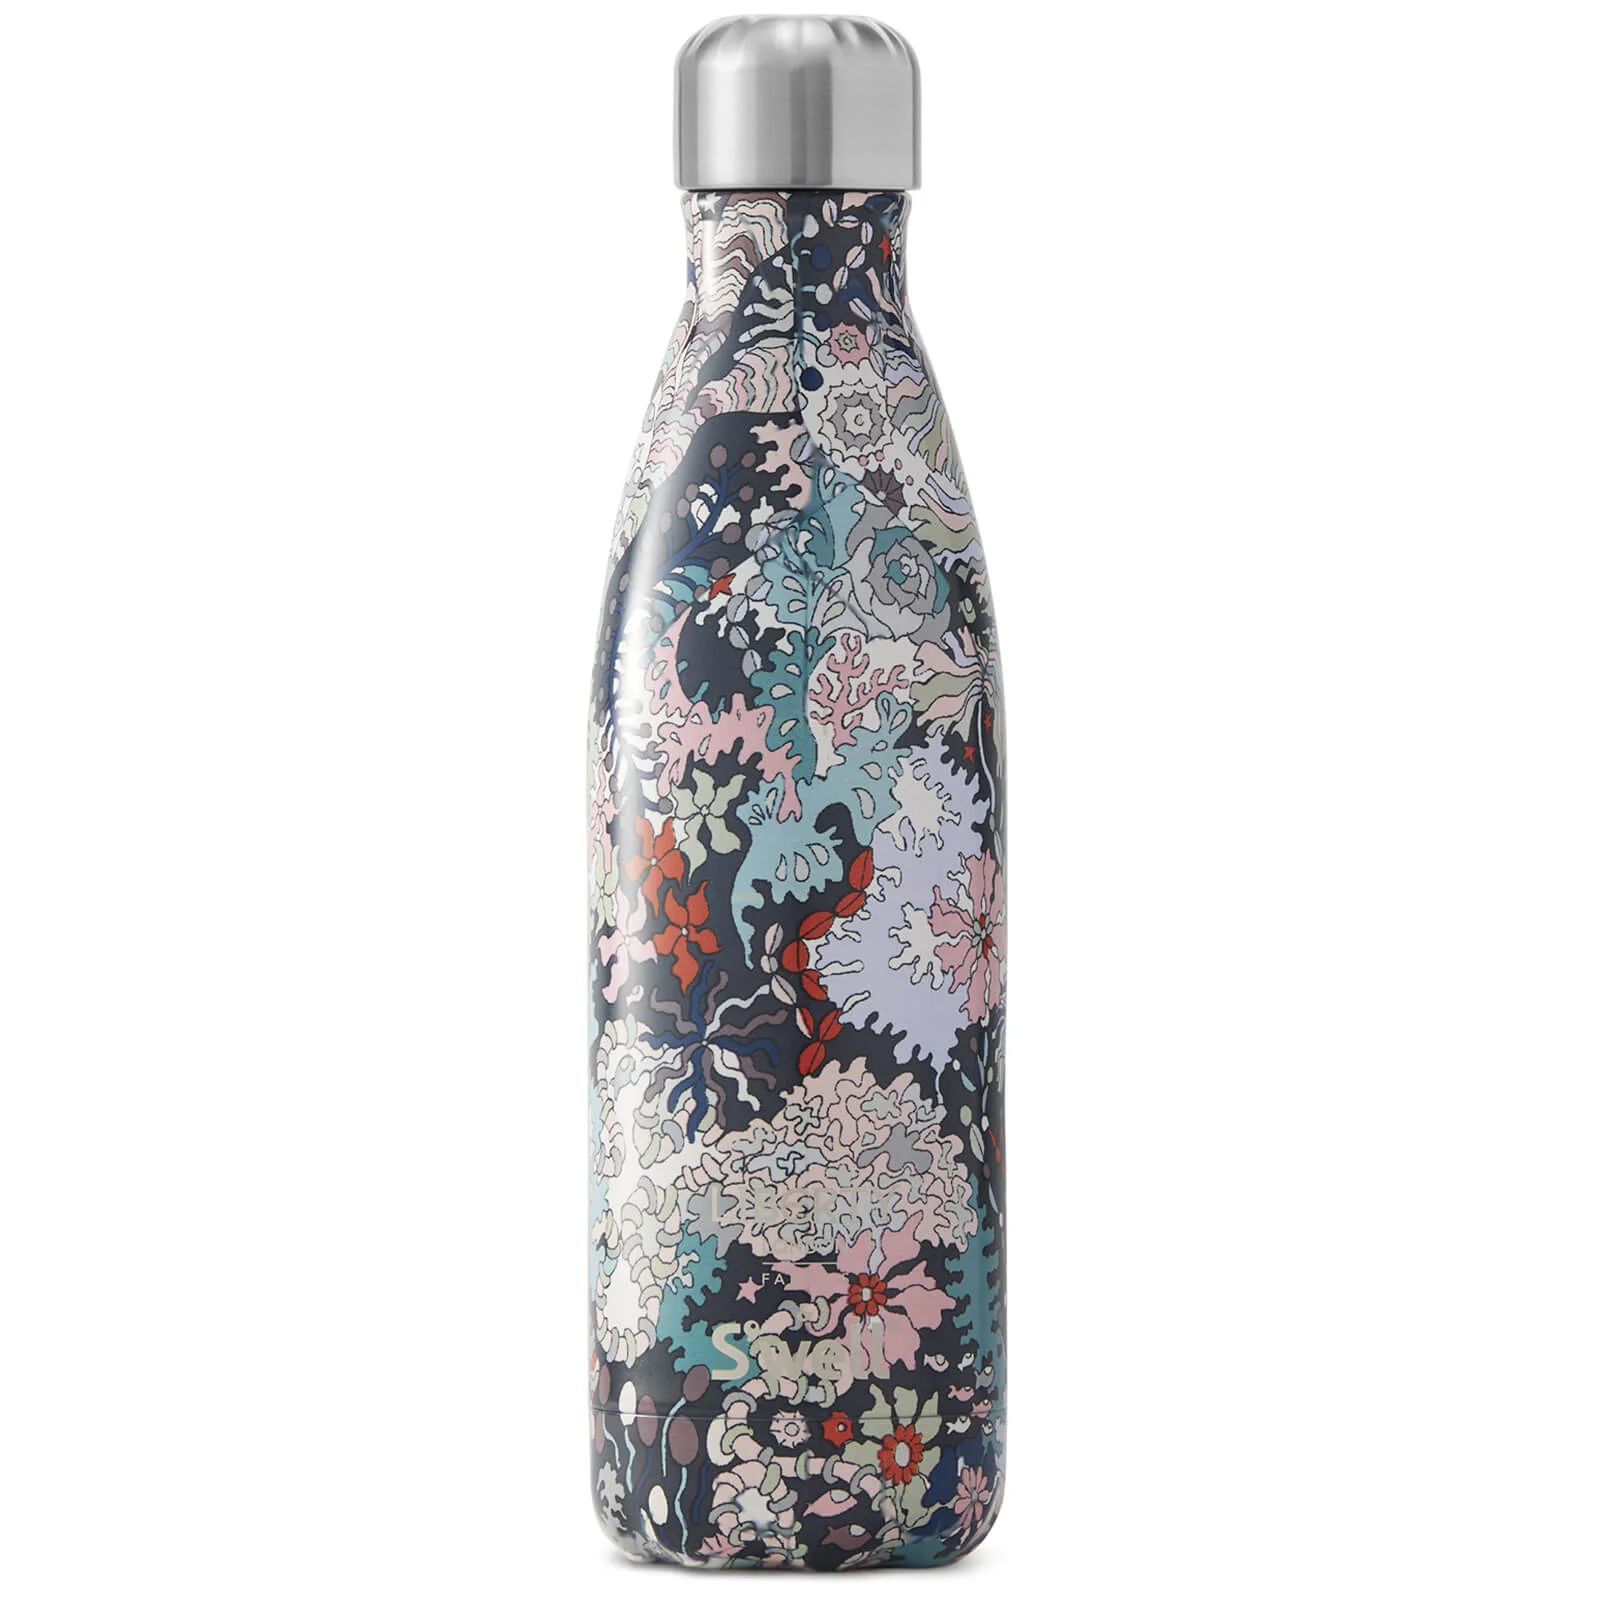 S'well Liberty Ocean Forest Water Bottle 500ml Image 1